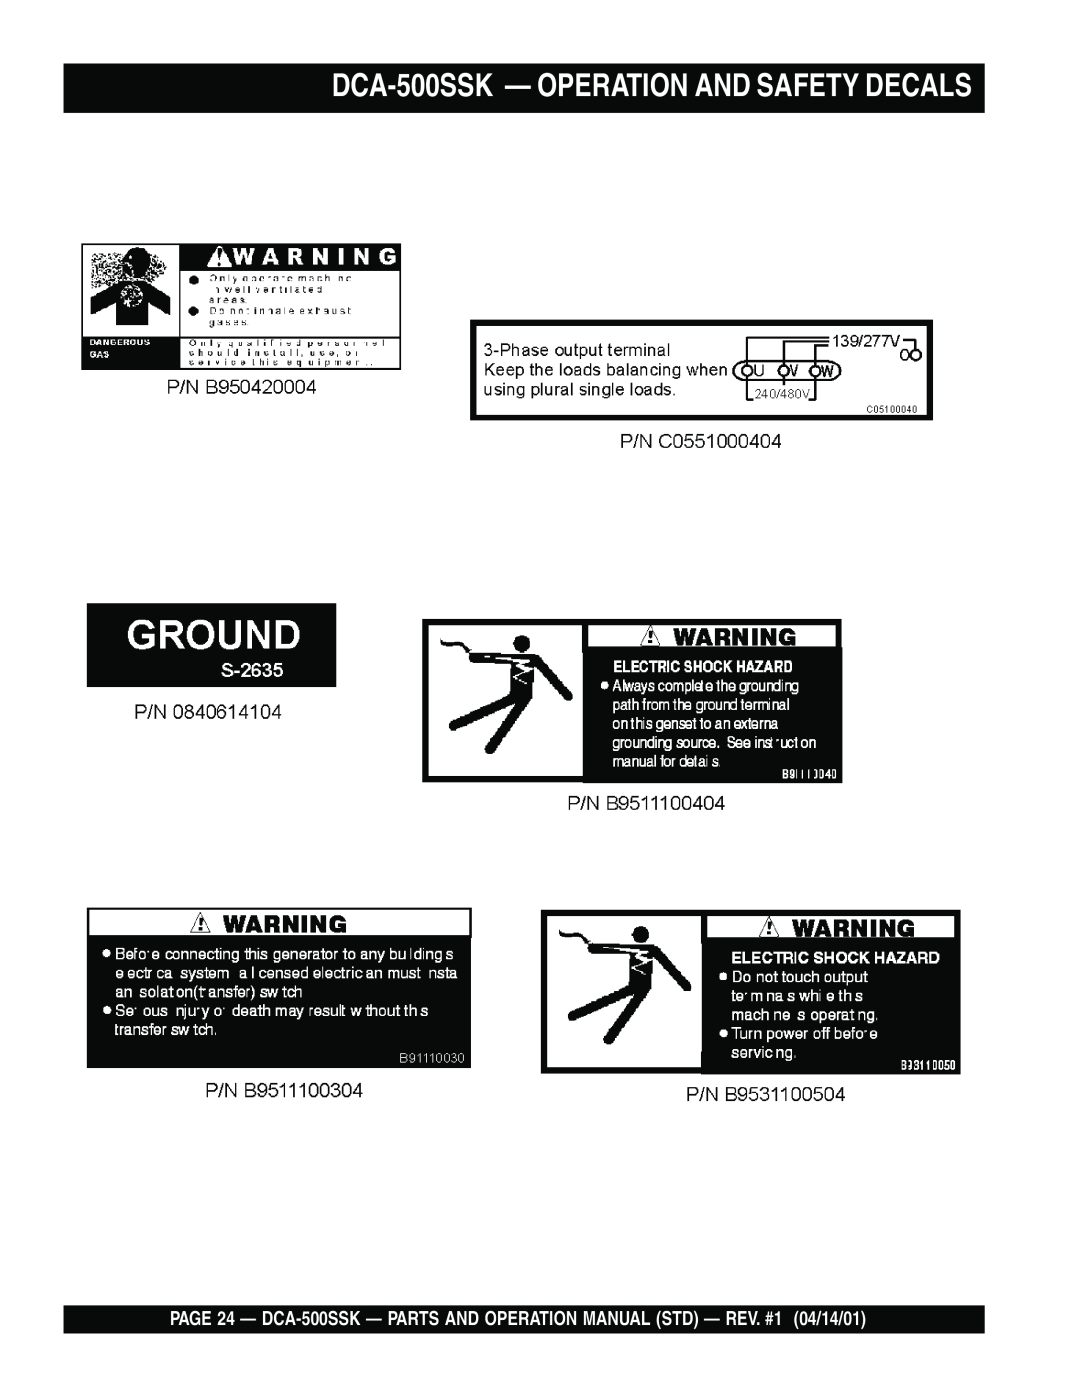 Multiquip operation manual DCA-500SSK - OPERATION AND SAFETY DECALS 